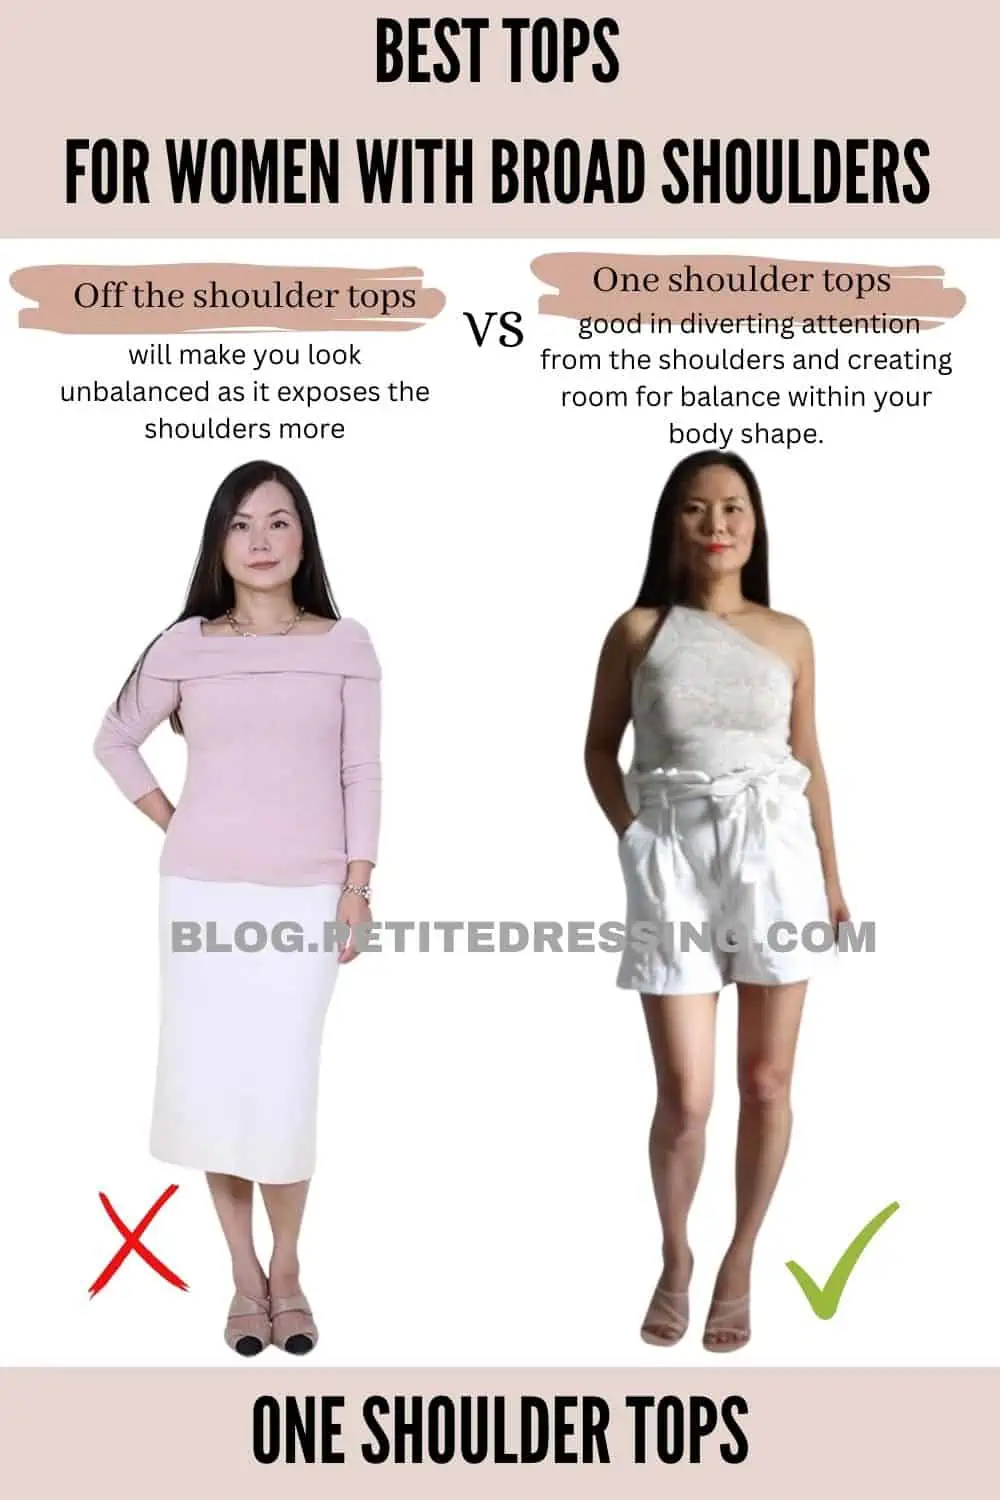 How to Get Rid of Broad Shoulders: 9 Simple & Effective Tips